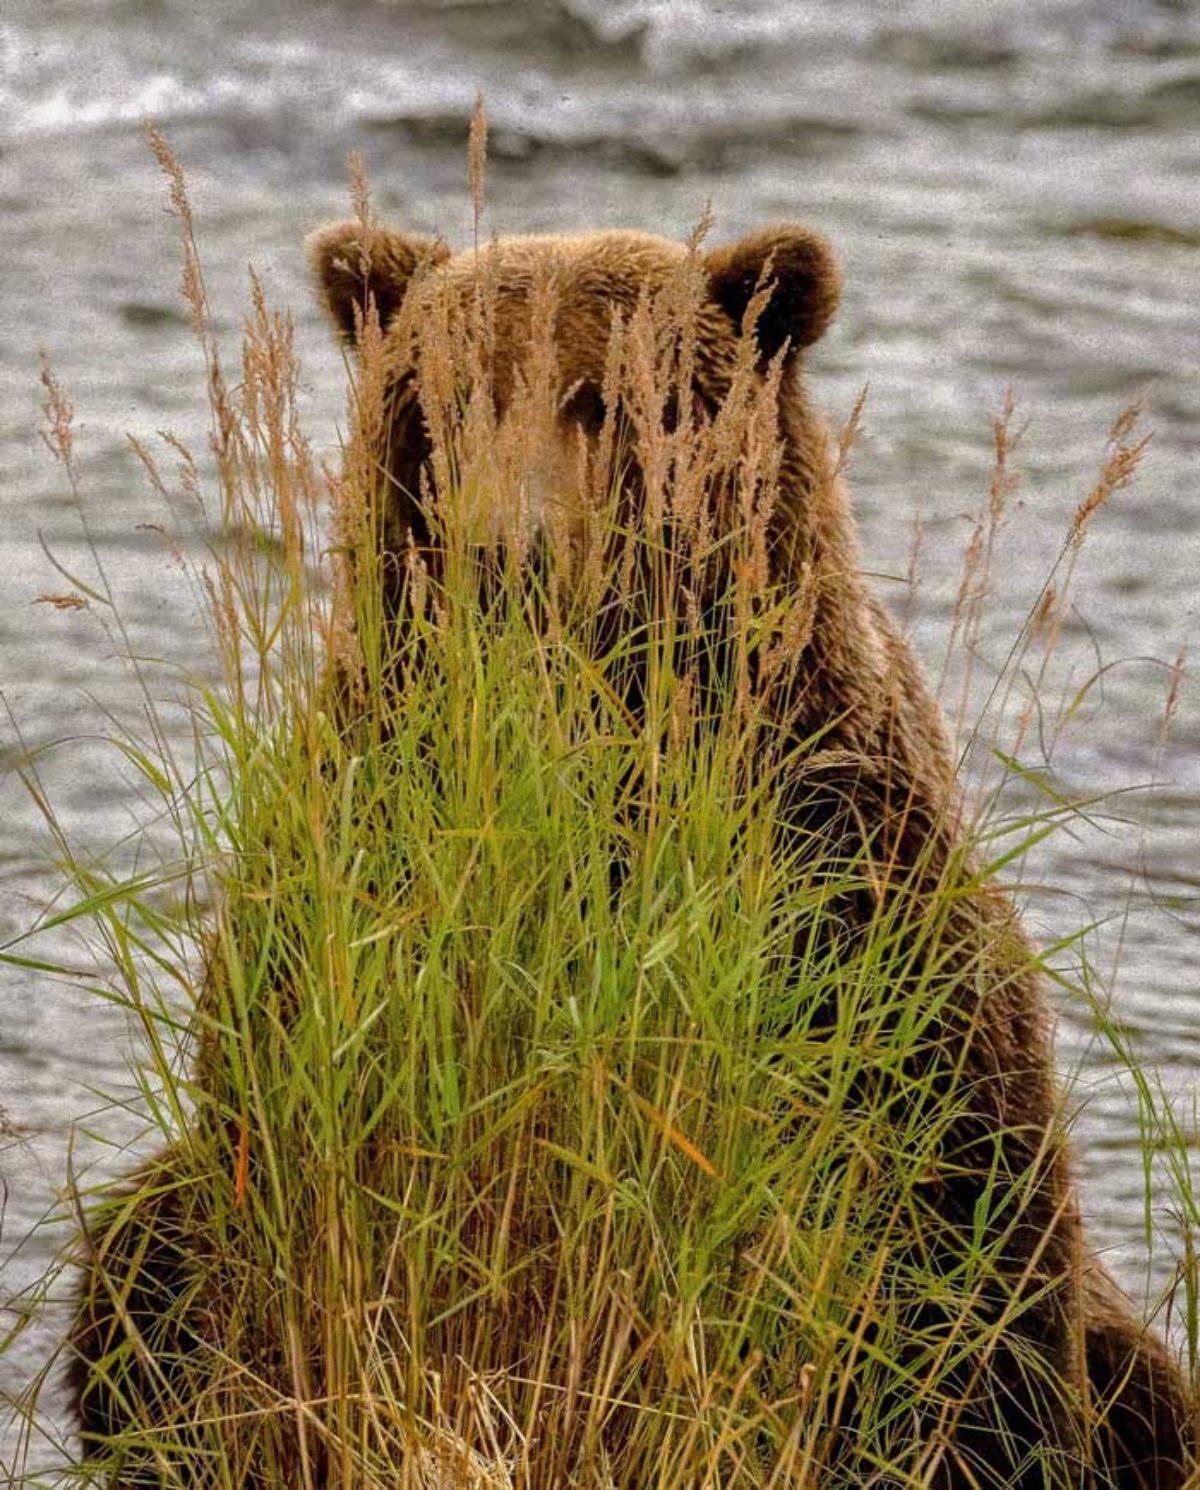 brown bear hiding behind some weeds near a body of water